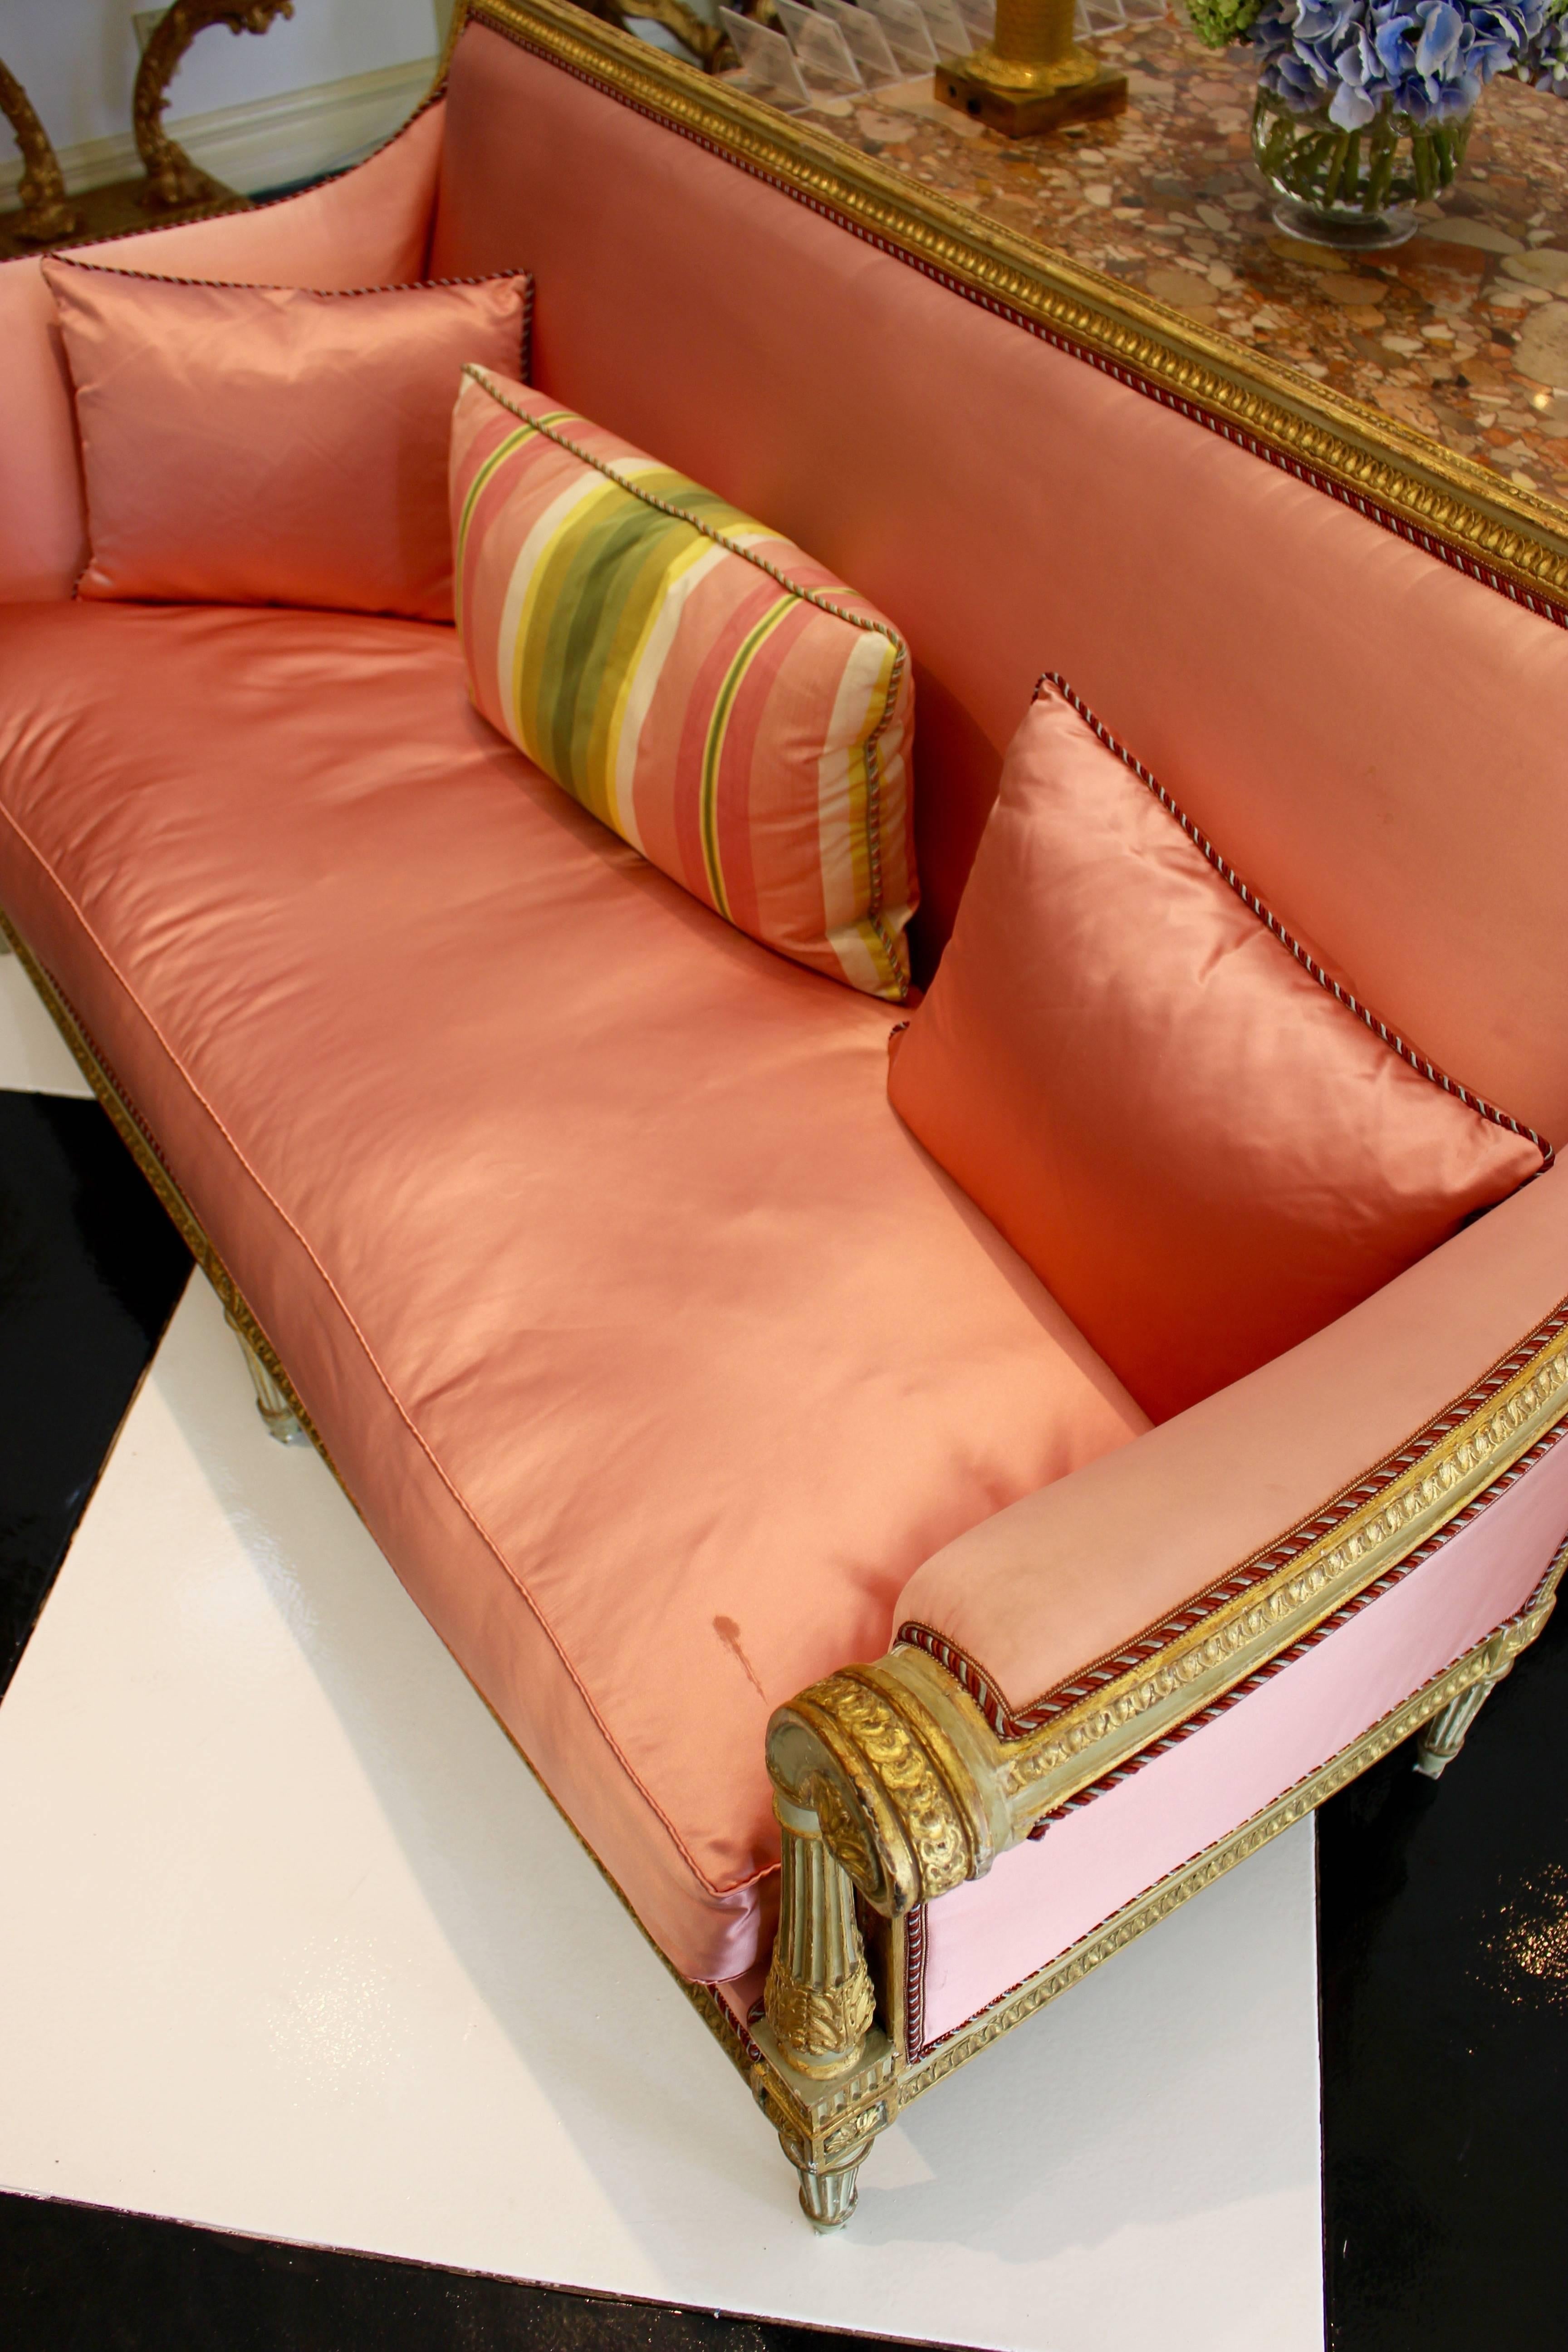 A French Louis XVI period painted and parcel-gilt canapé settee from the late 18th century, with rectangular back, out-scrolled arms, fluted legs and deep cantaloupe colored upholstery. This French settee features an exquisite structure, typical of